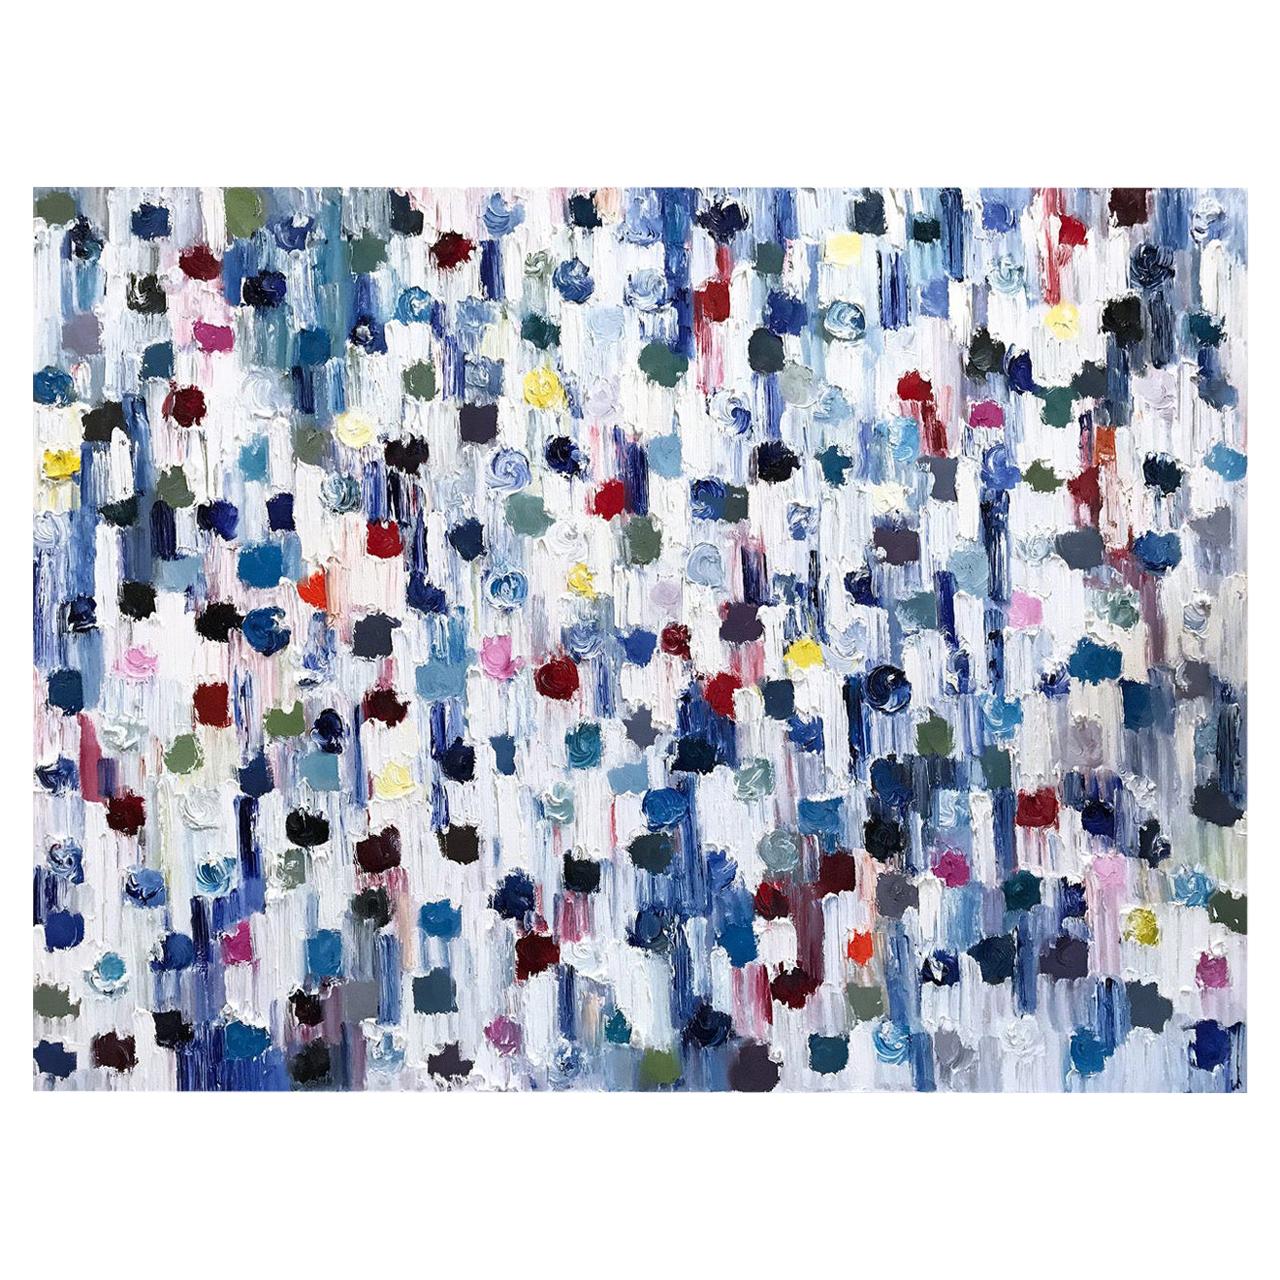 "Dripping Dots-St. Lucia" 2018 Oil on Canvas by Cindy Shaoul For Sale